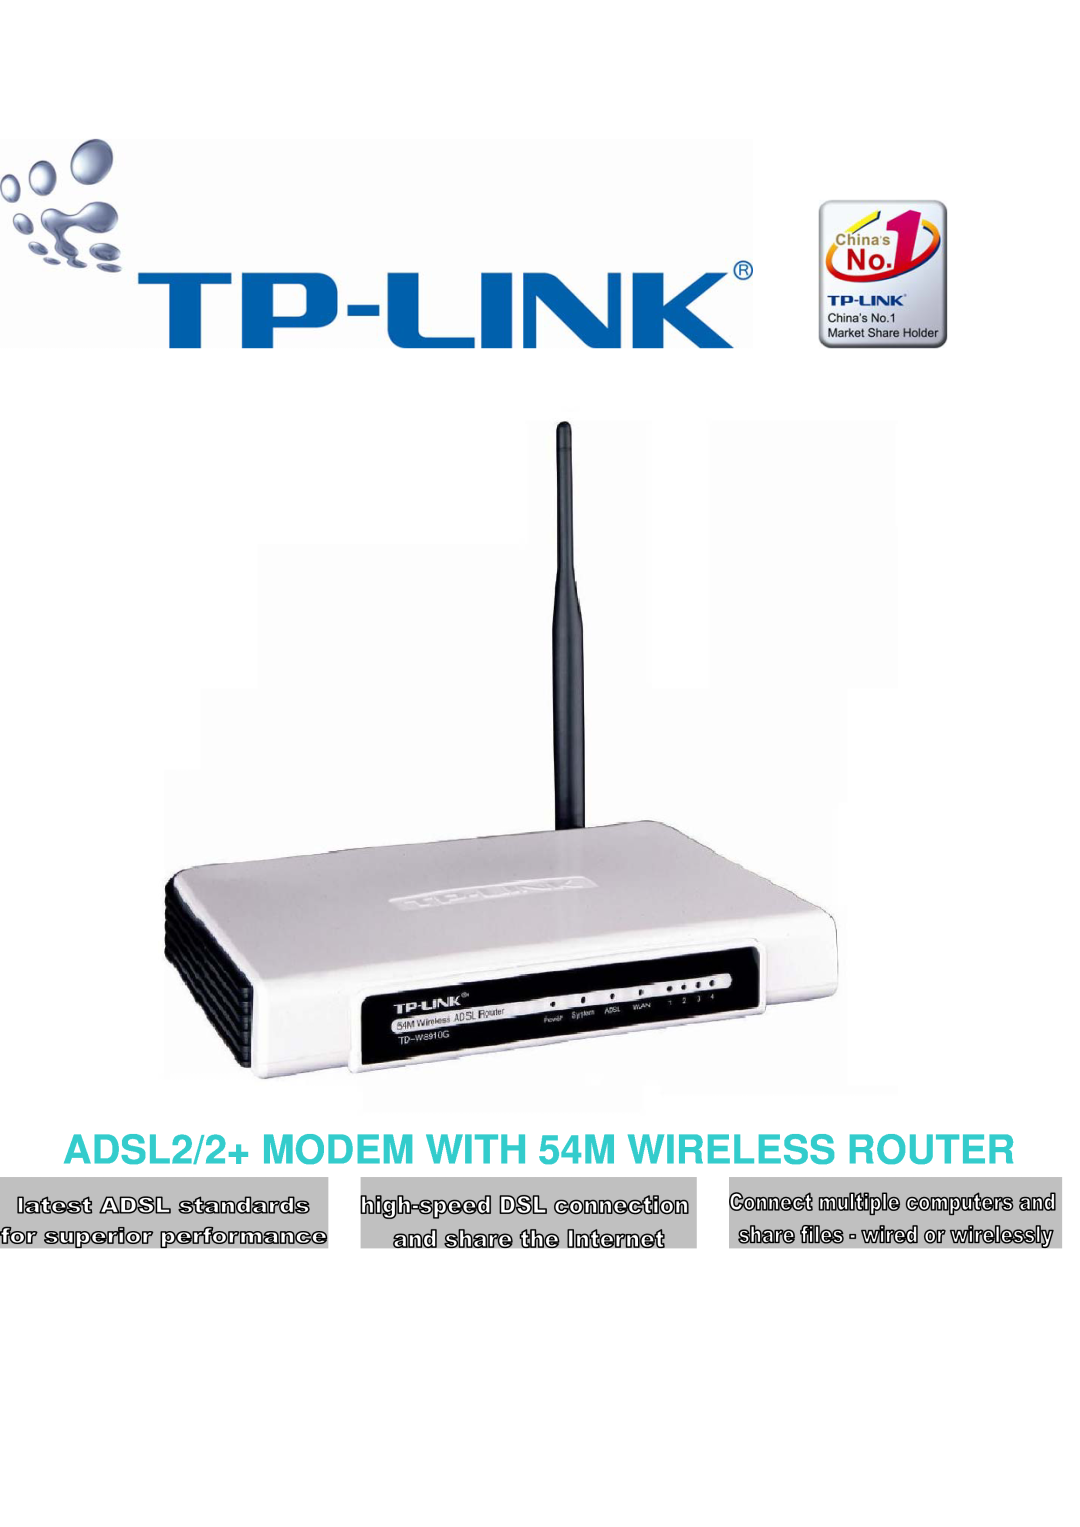 TP-Link TD-W8910G manual ADSL2/2+ MODEM WITH 54M WIRELESS ROUTER 